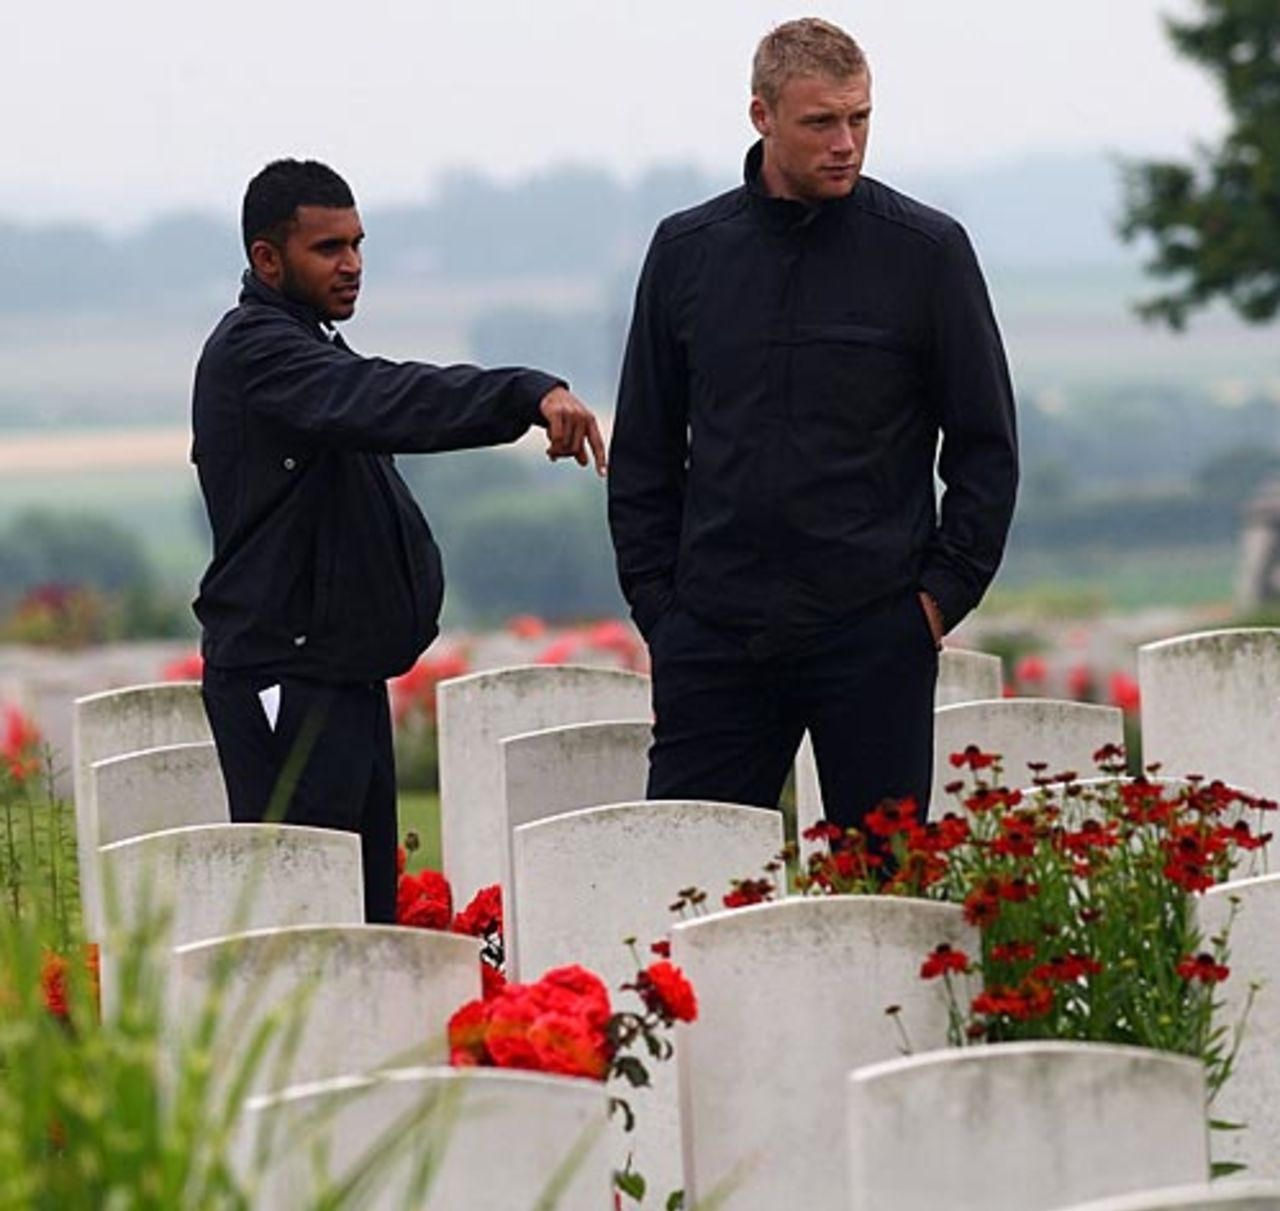 Andrew Flintoff and Adil Rashid at a First World War grave site during a trip to Flanders, June 27, 2009